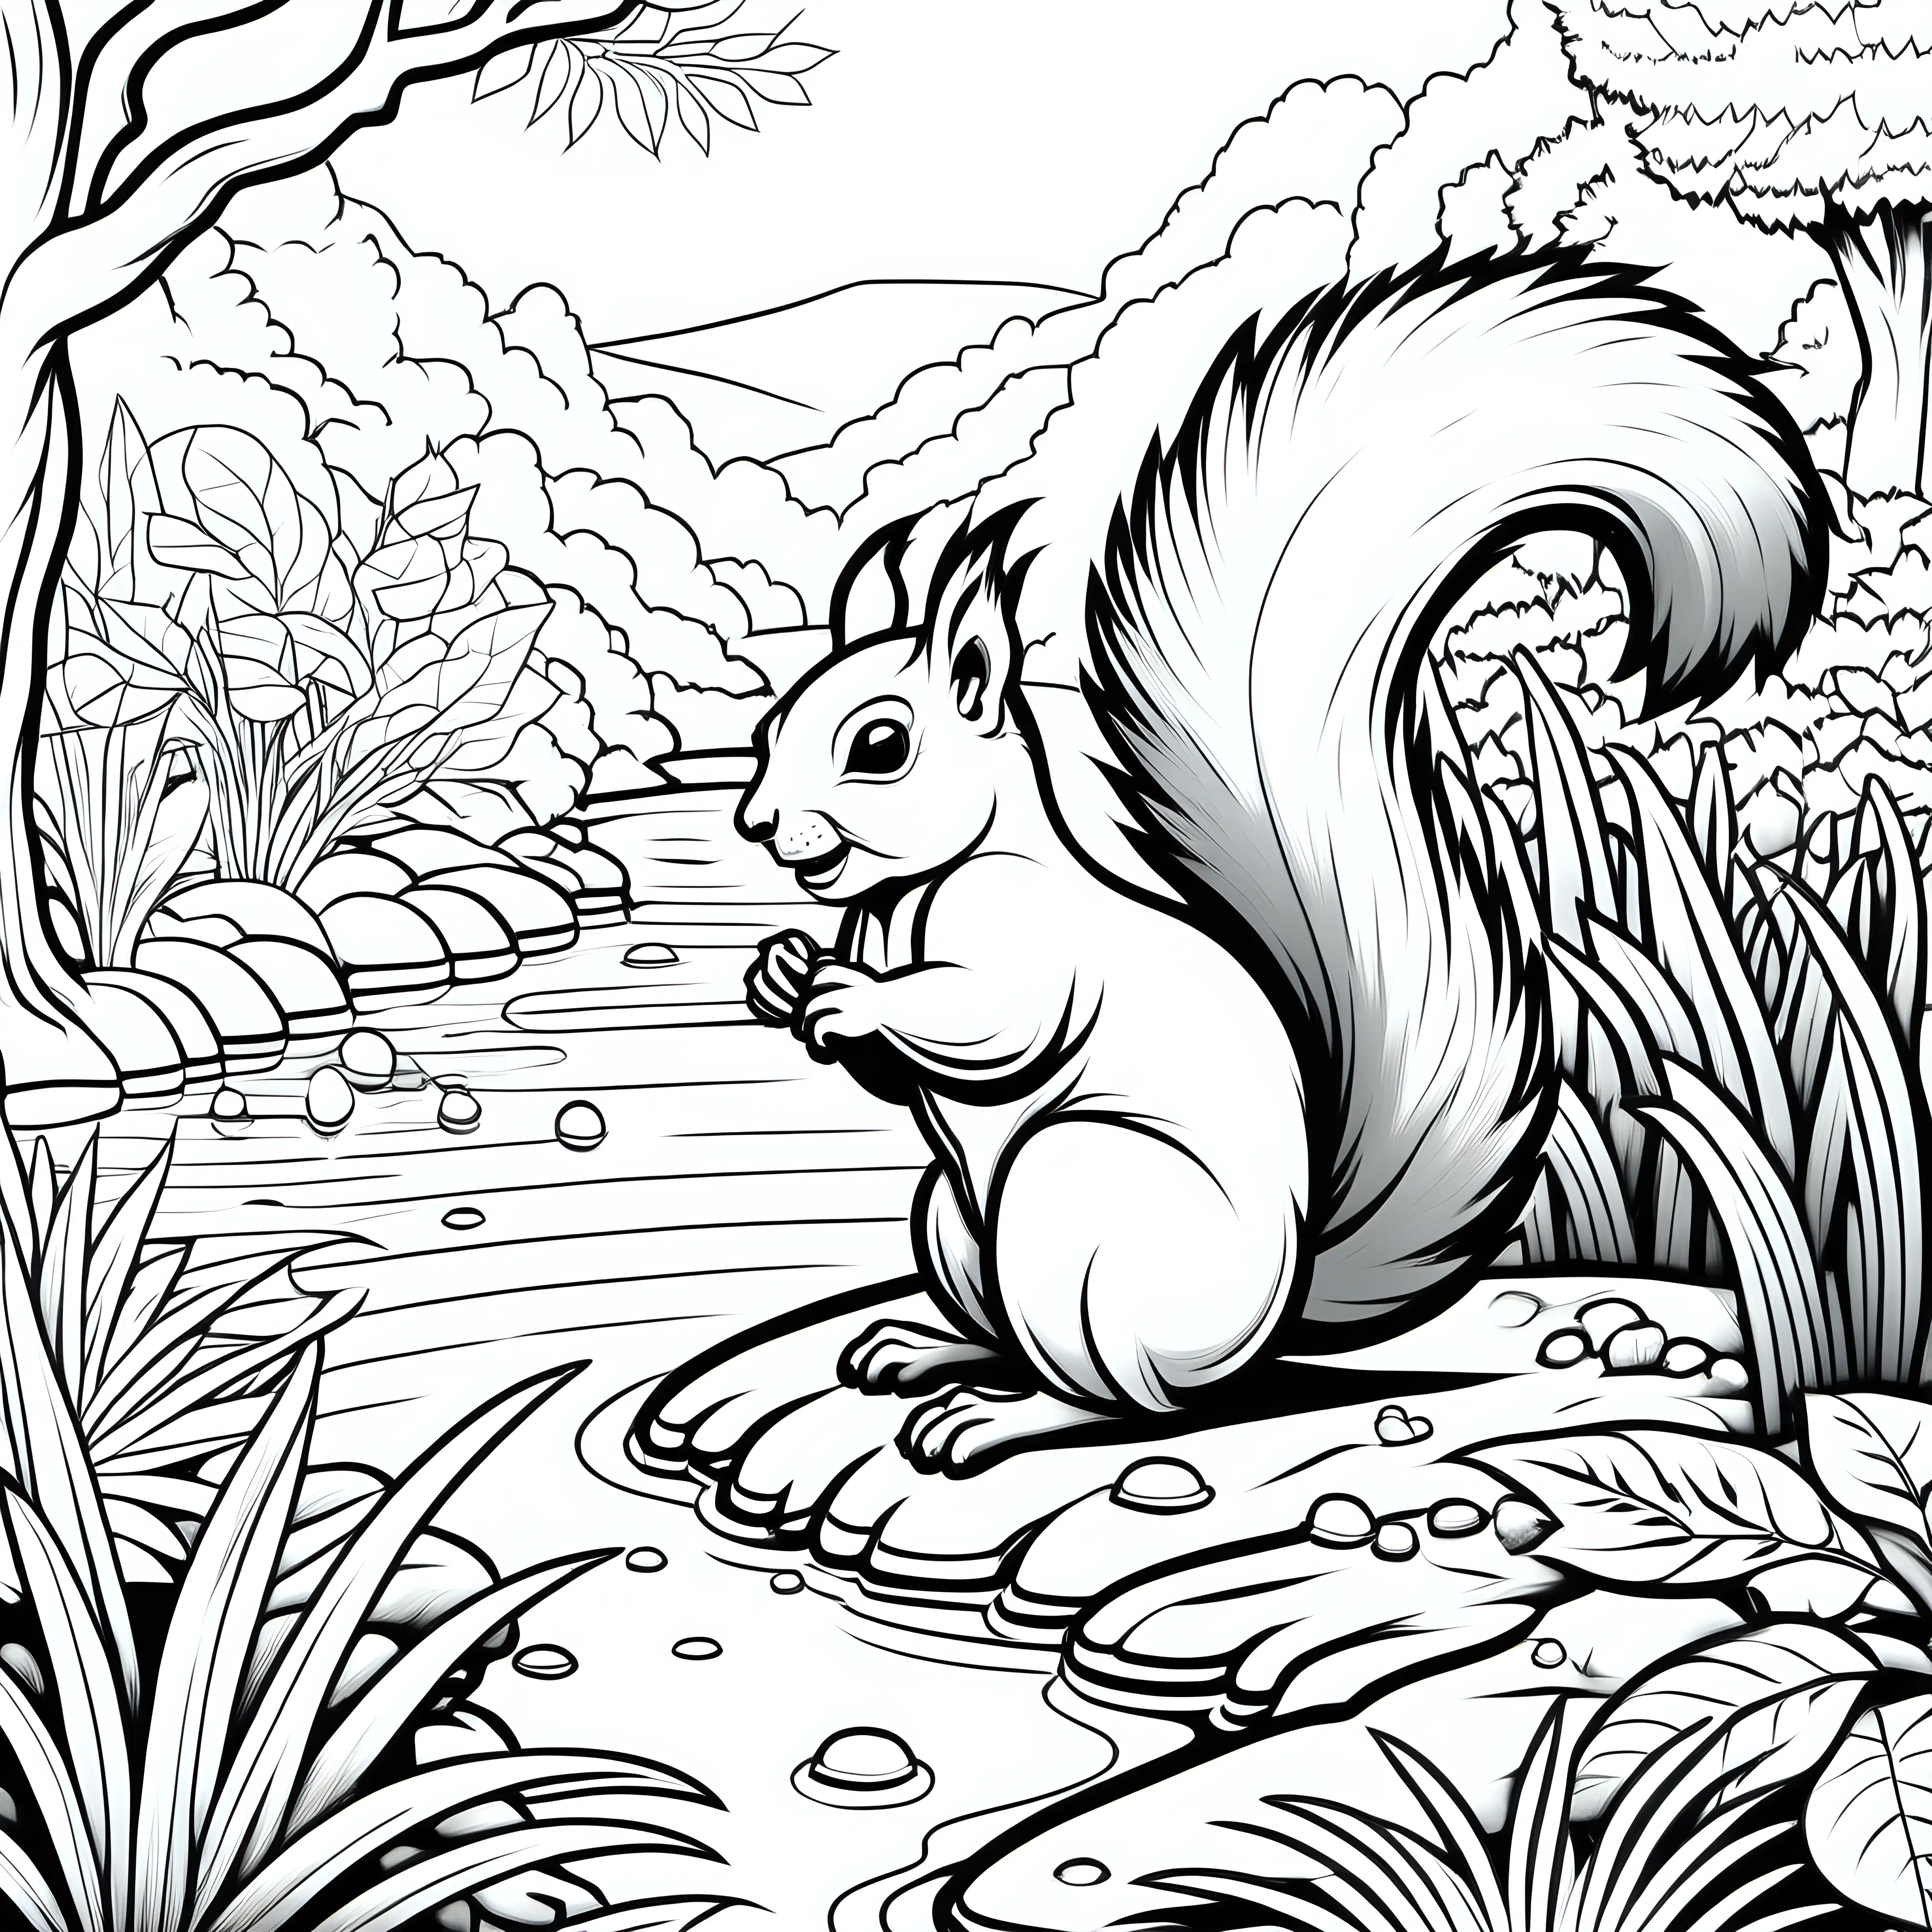 Coloring page for kids, Squirrel in Garden of Eden close to a water body, clean line art